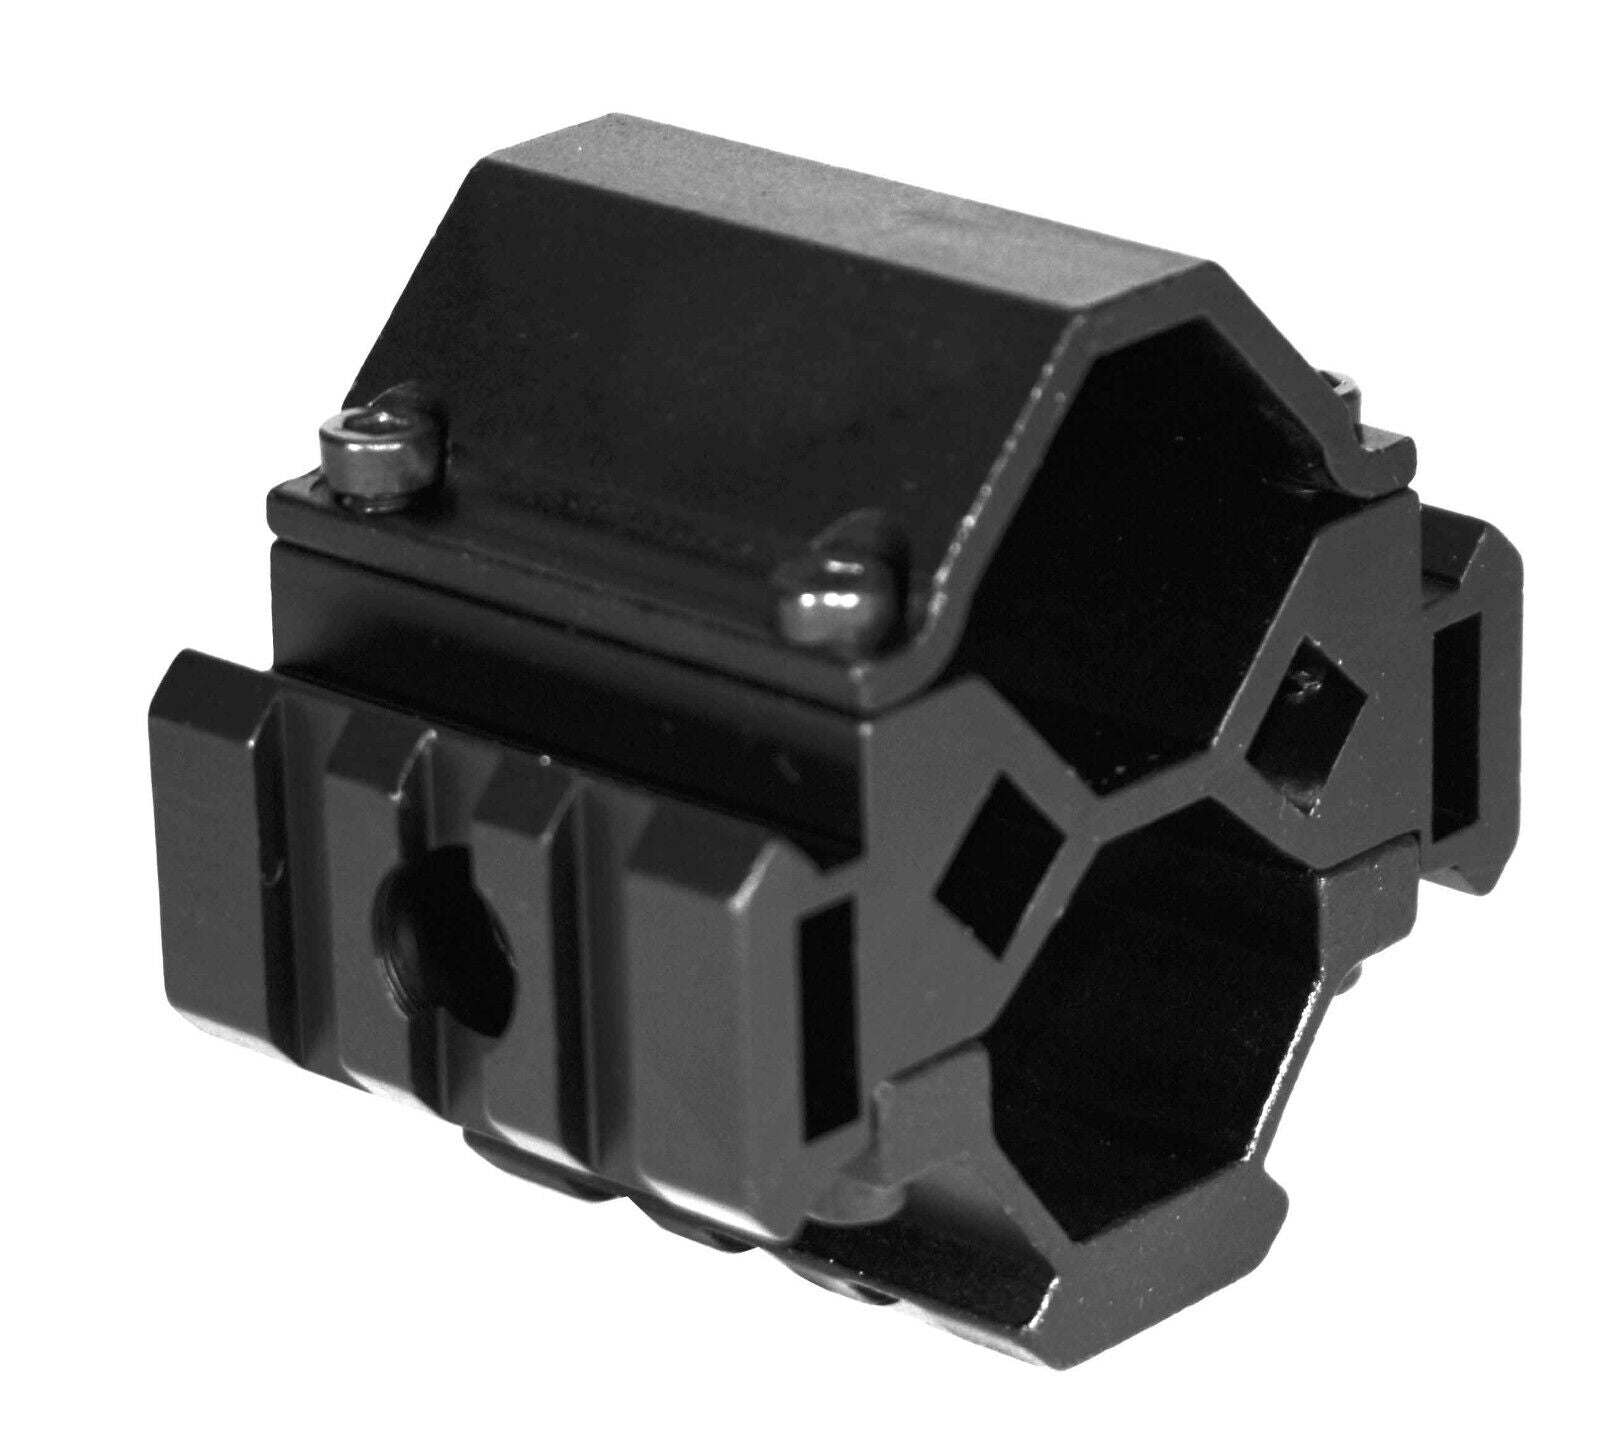 Tactical Magazine Tube Mount Compatible With Remington 870 12 Gauge Pumps. - TRINITY SUPPLY INC